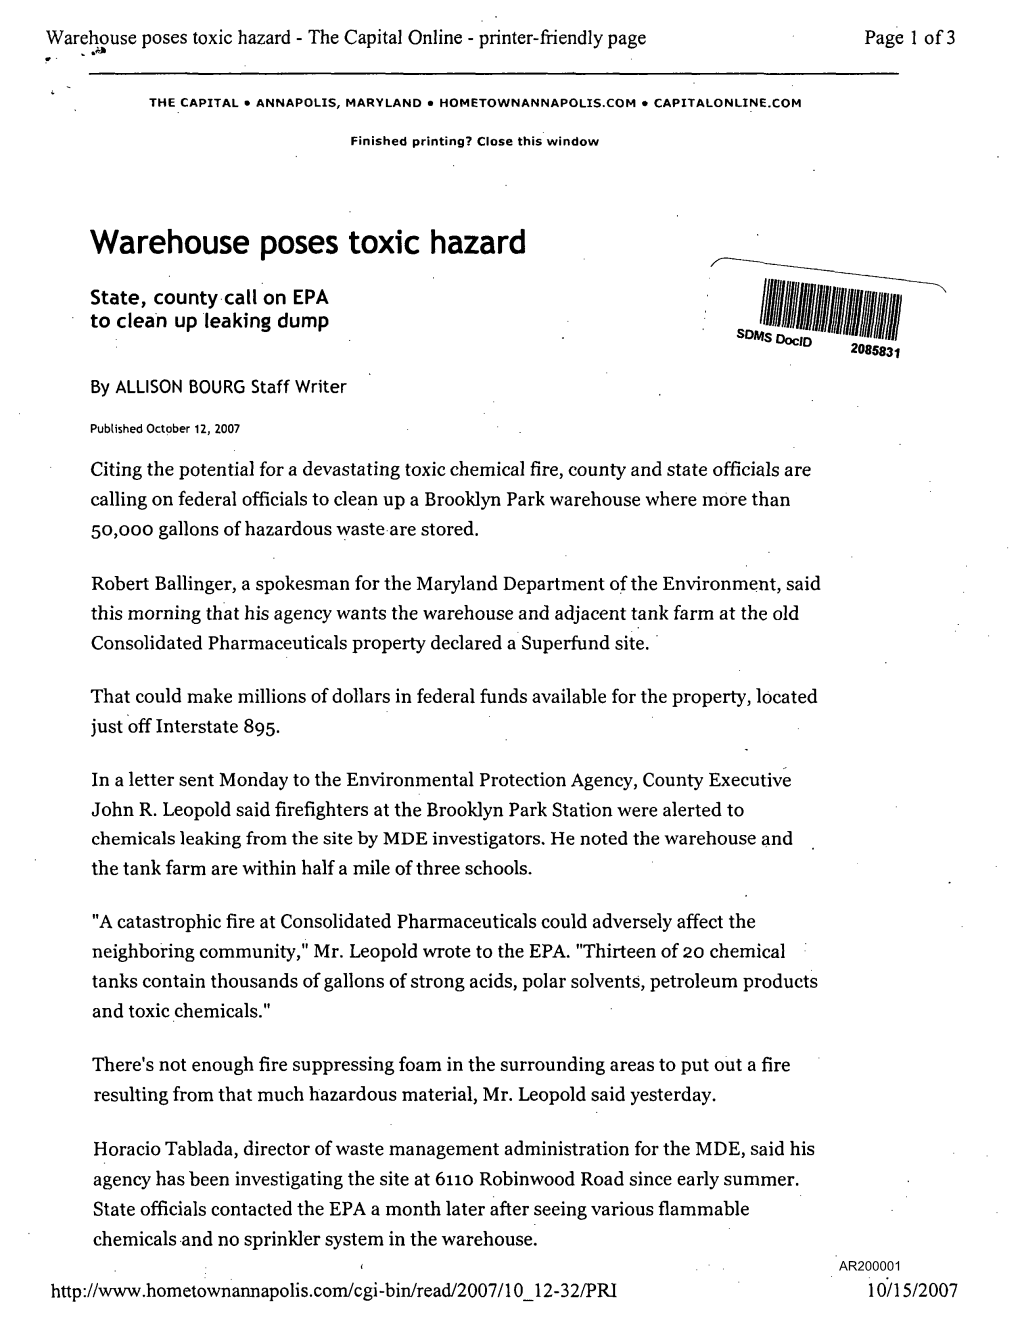 Warehouse Poses Toxic Hazard - the Capital Online - Printer-Friendly Page Page 1 of 3 * •**